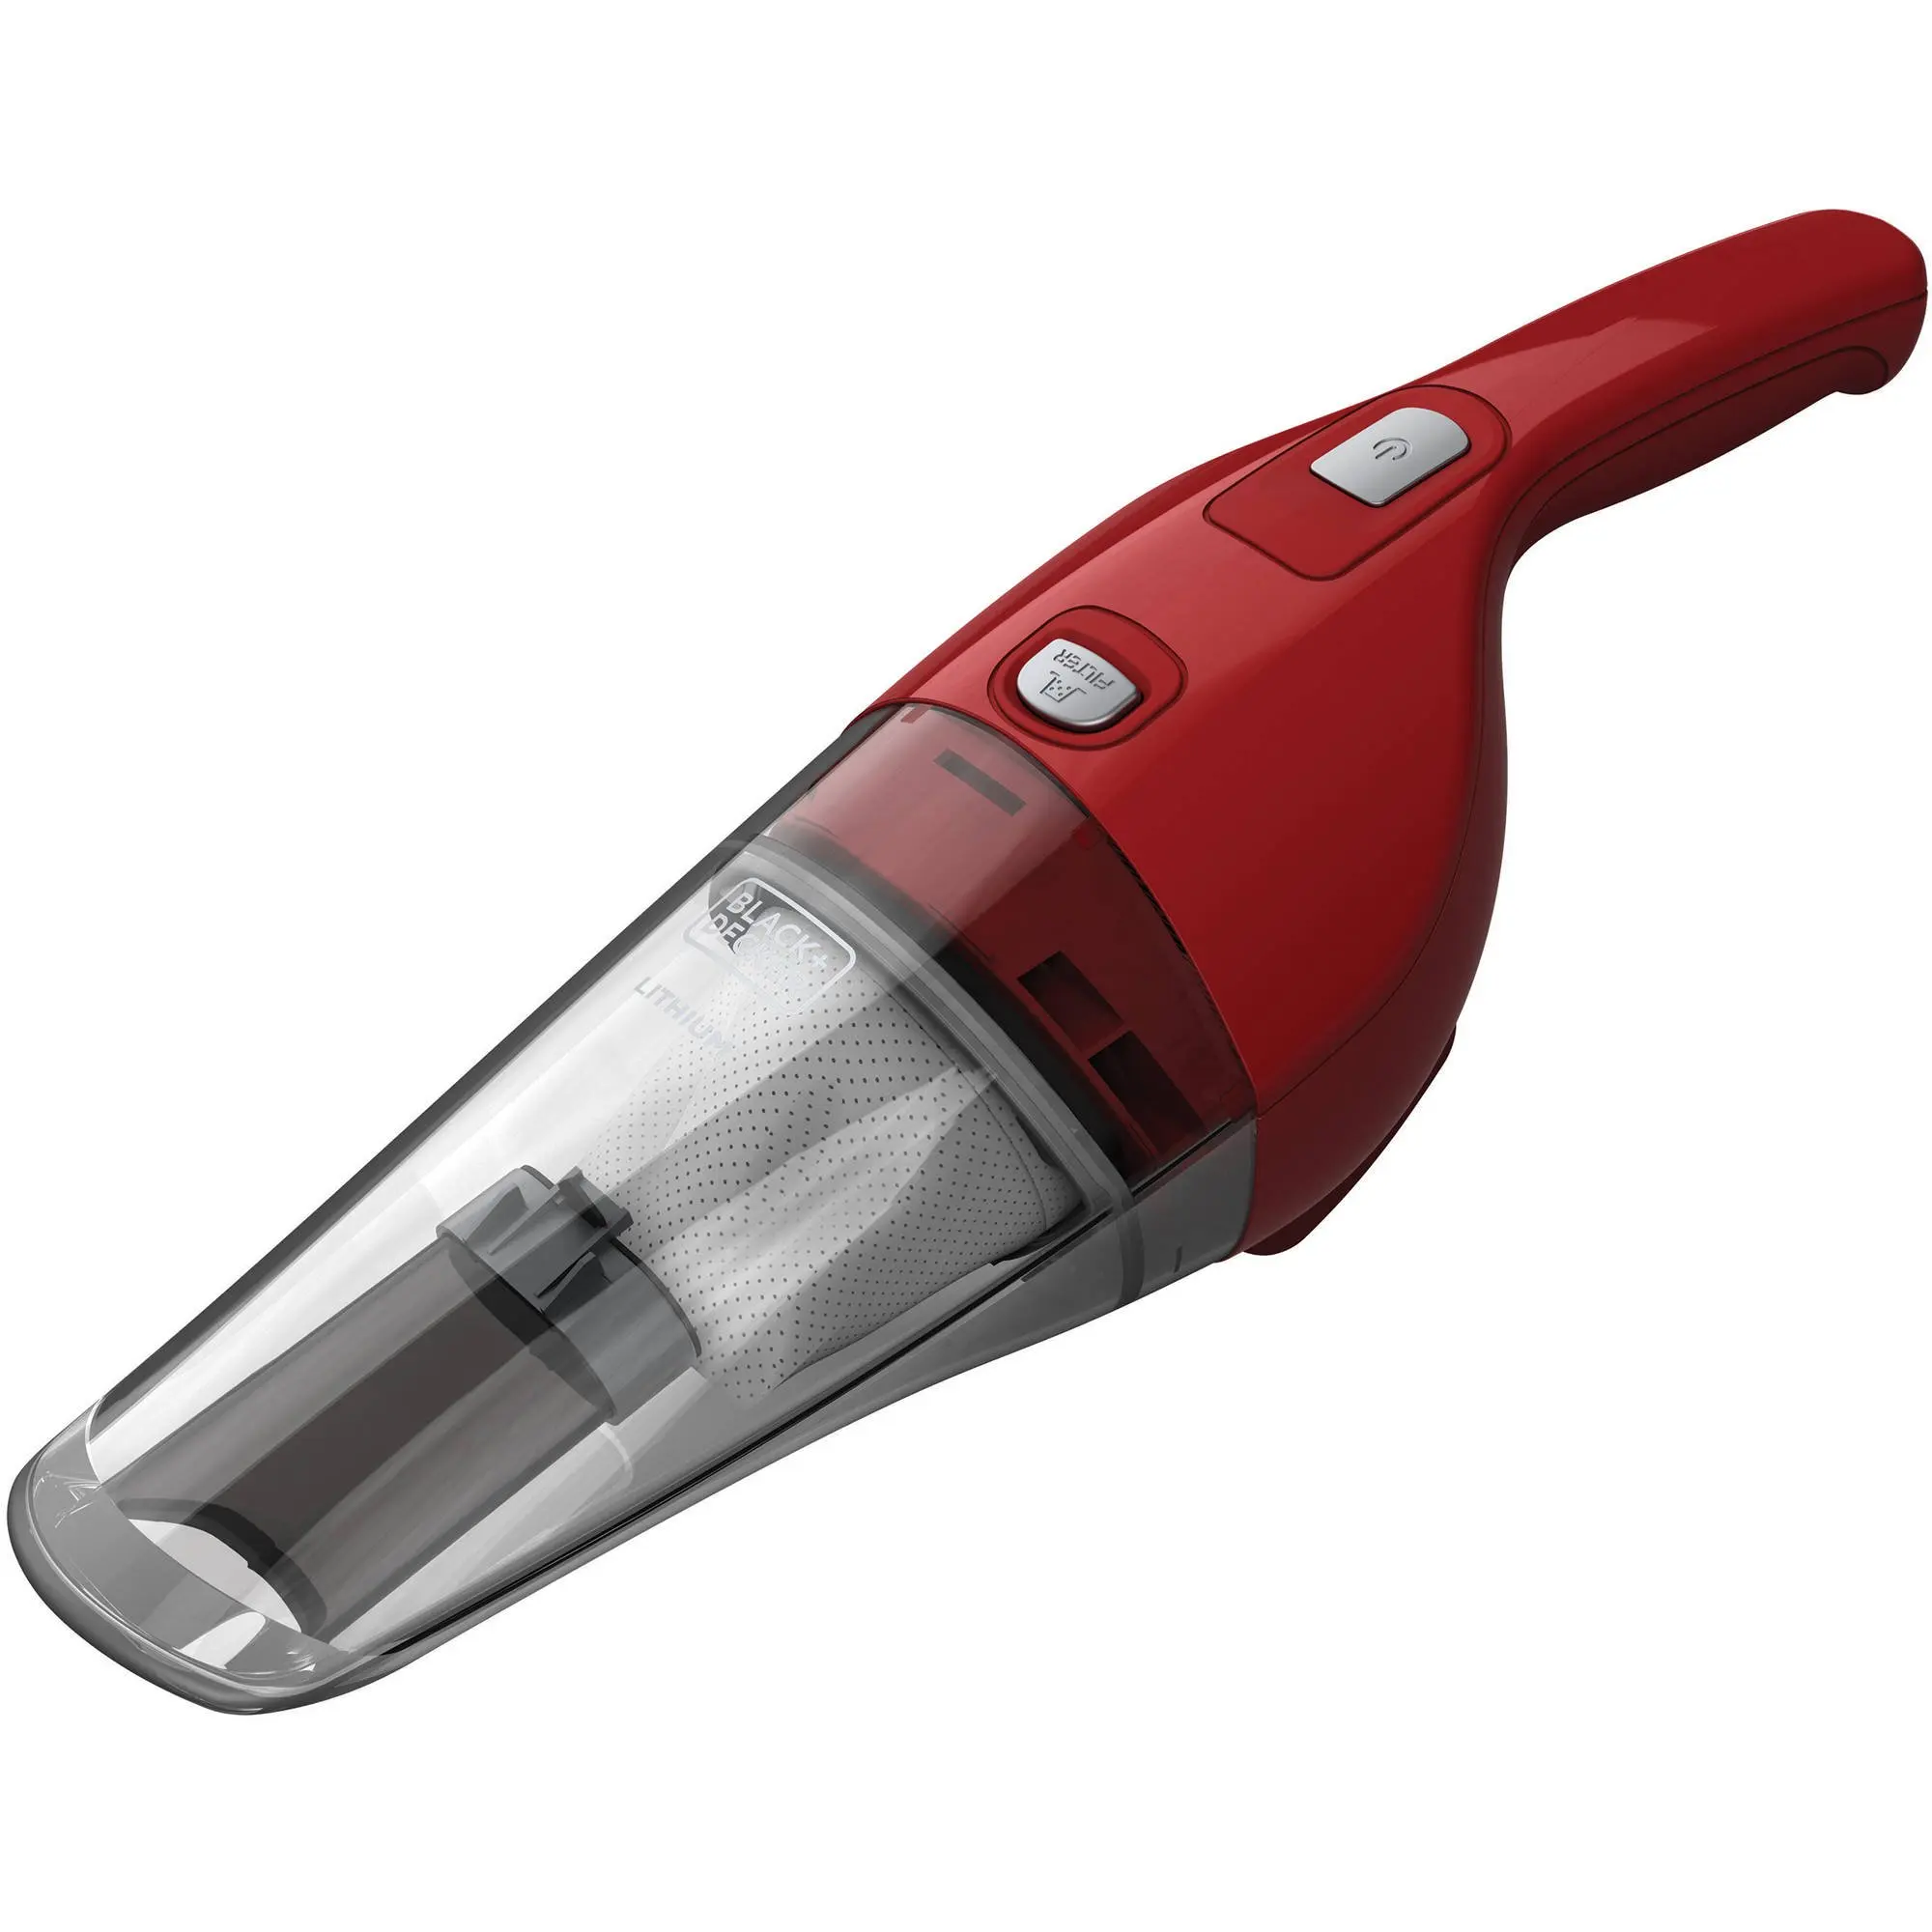 Cheap Handheld Dustbuster, find Handheld Dustbuster deals on line at